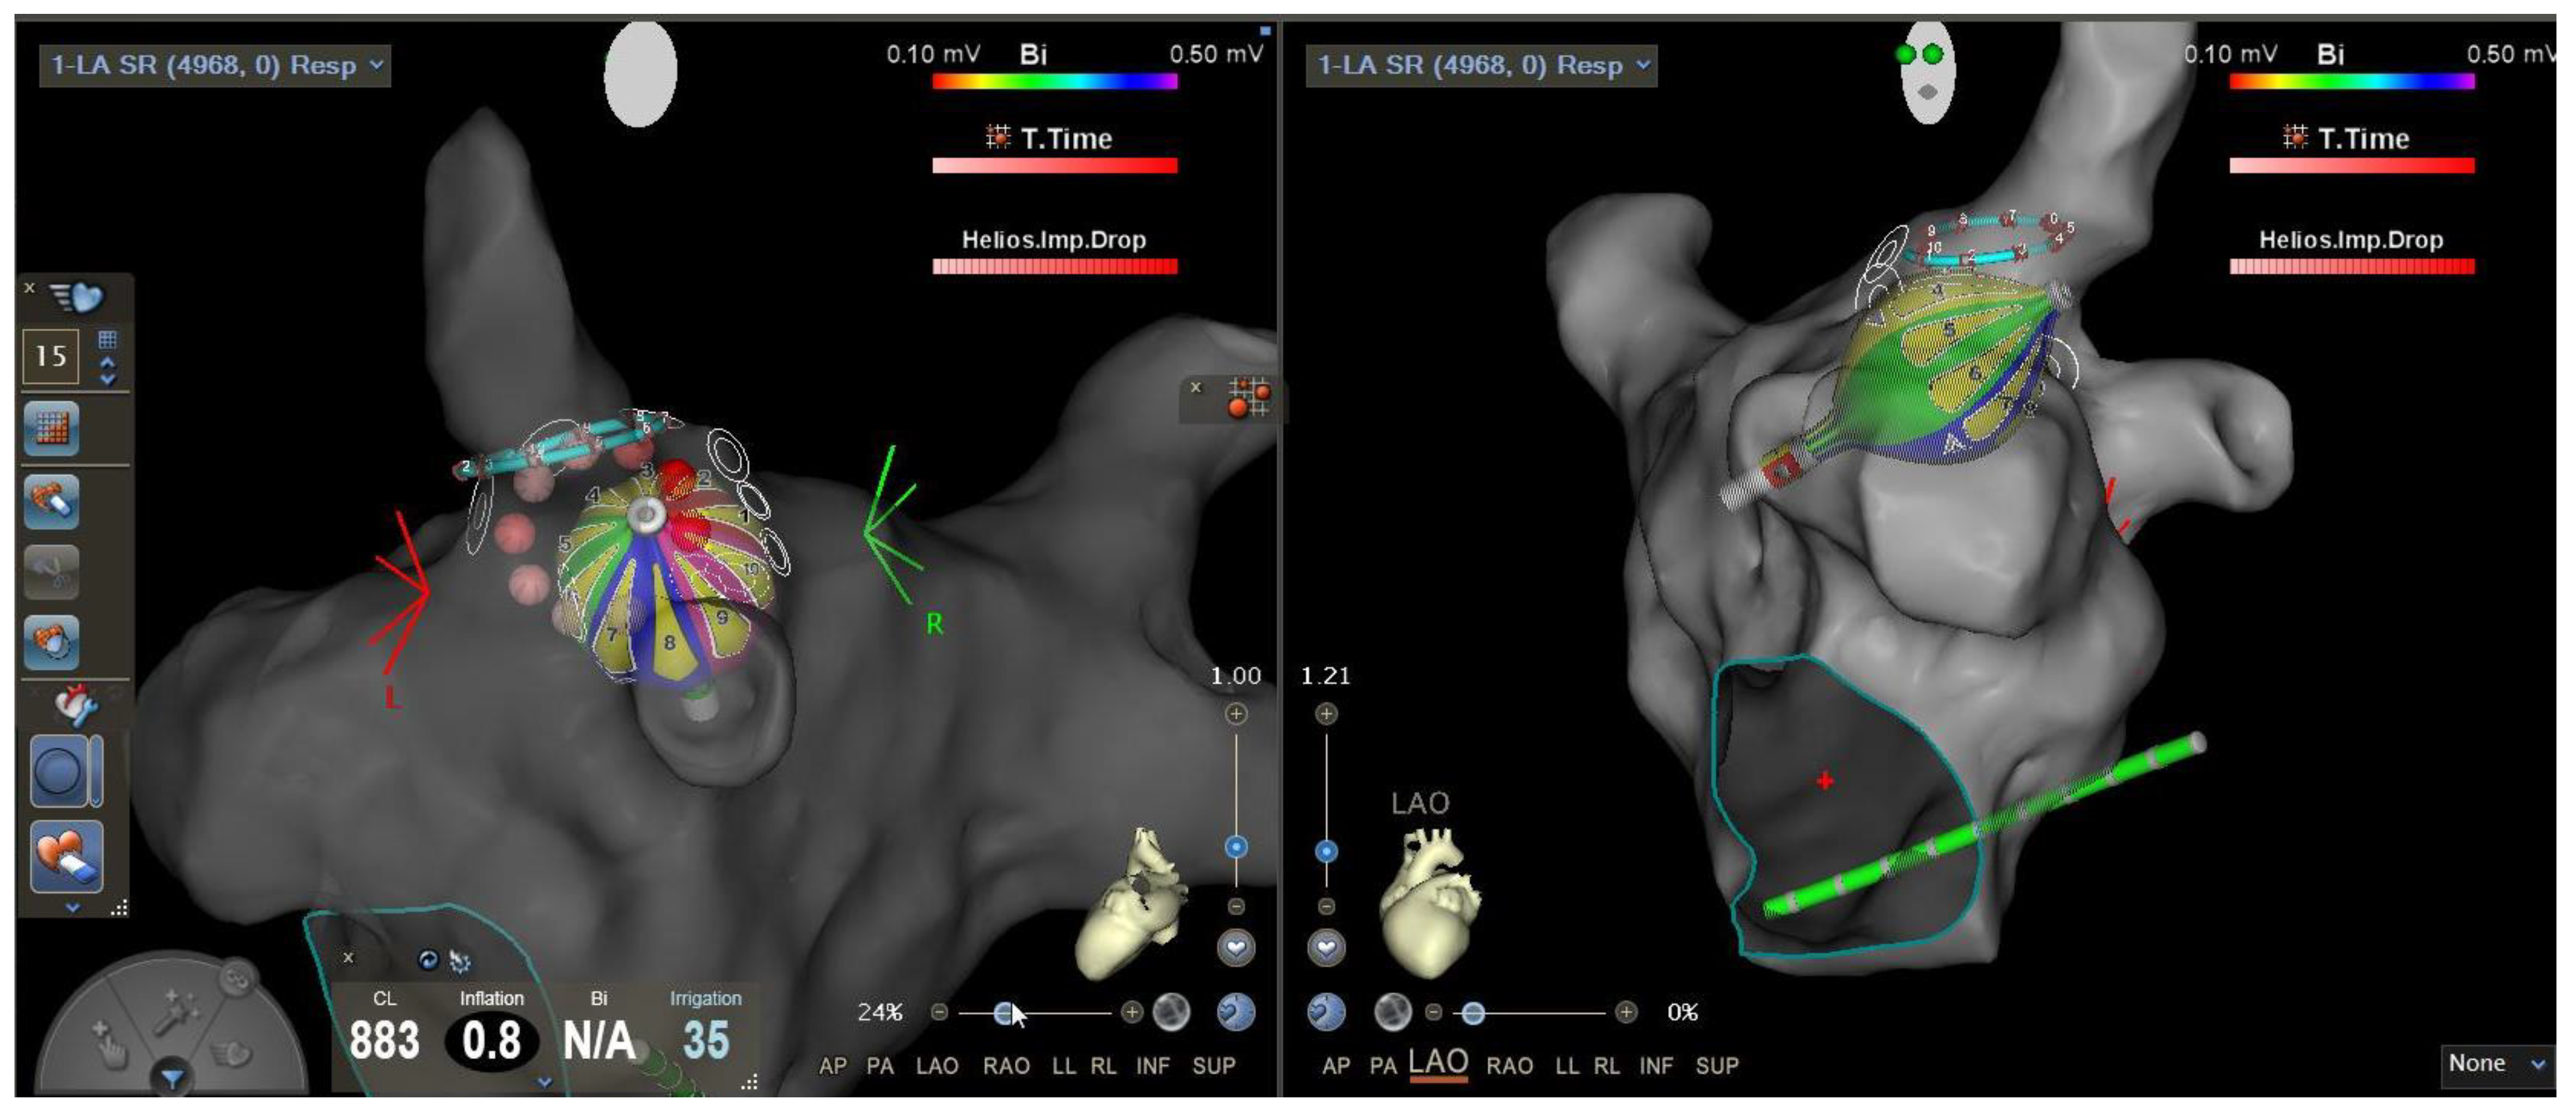 High-Power Short Duration Ablation for Pulmonary Vein Isolation